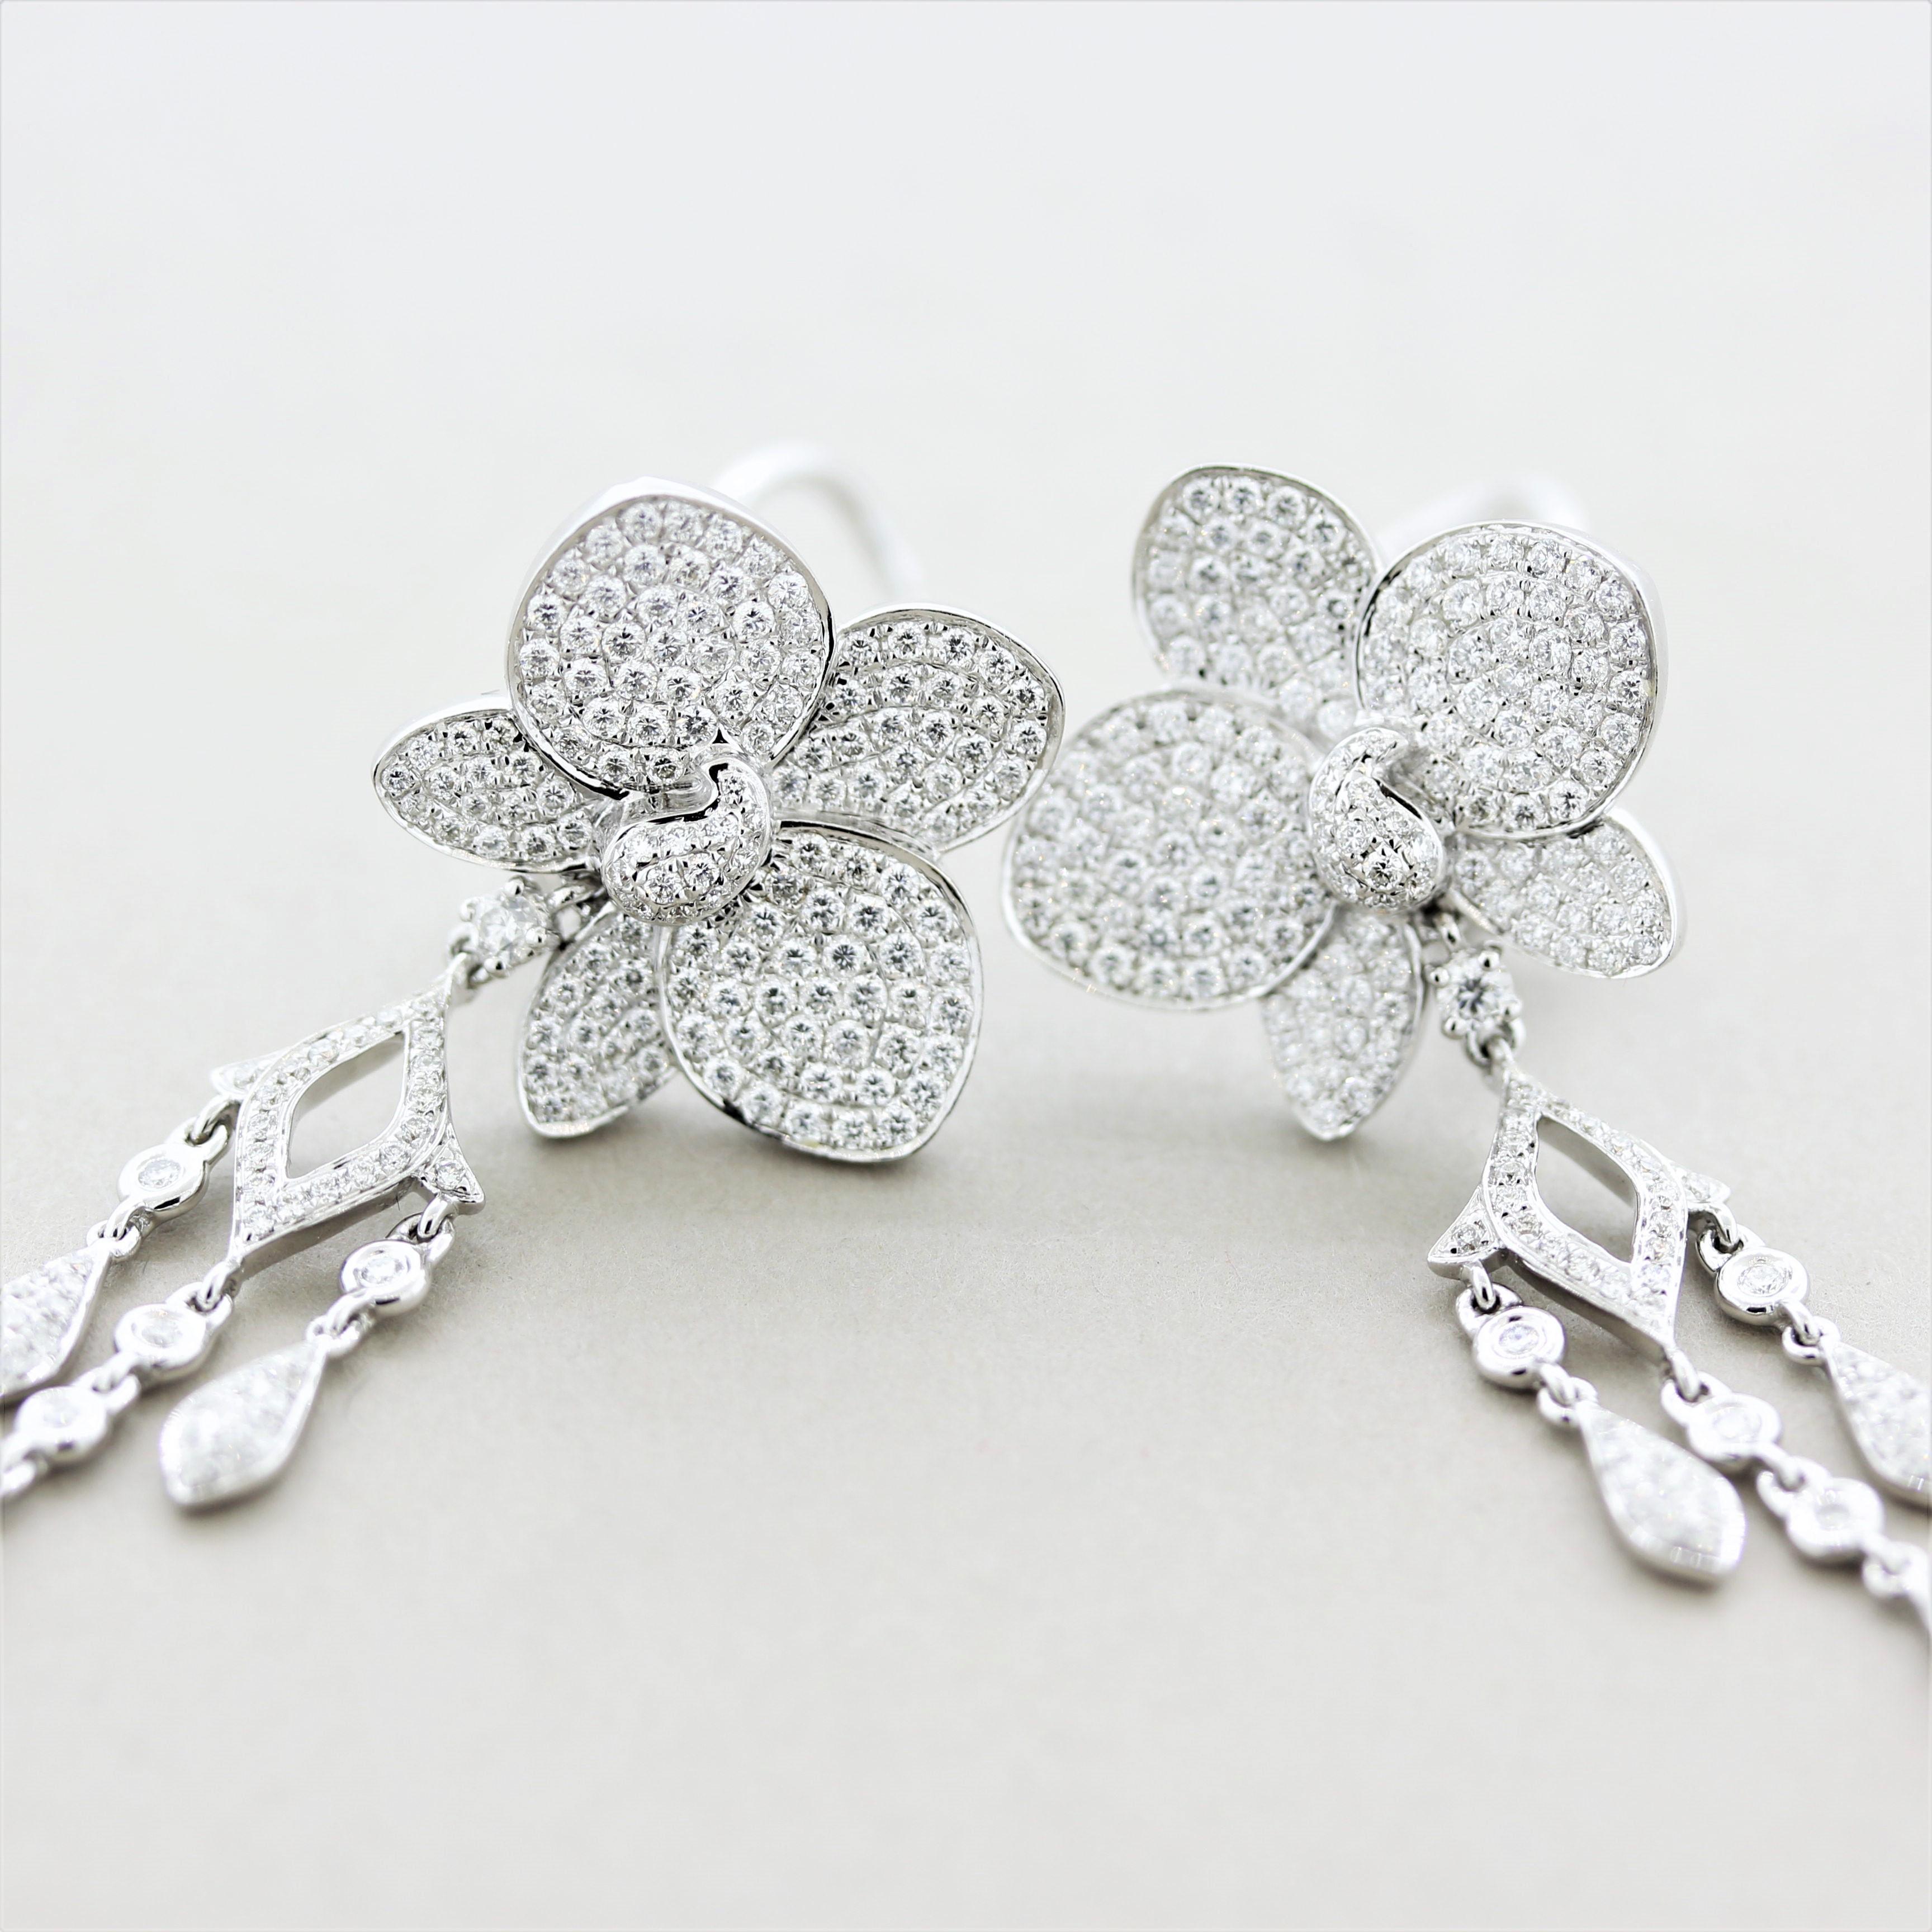 A stylish pair of earrings with great movement and flow. They feature 2.40 carats of round brilliant-cut diamonds pave-set all over the earrings in a floral design. The bottoms of the earrings drop and dangle freely as you move and dance. Made in